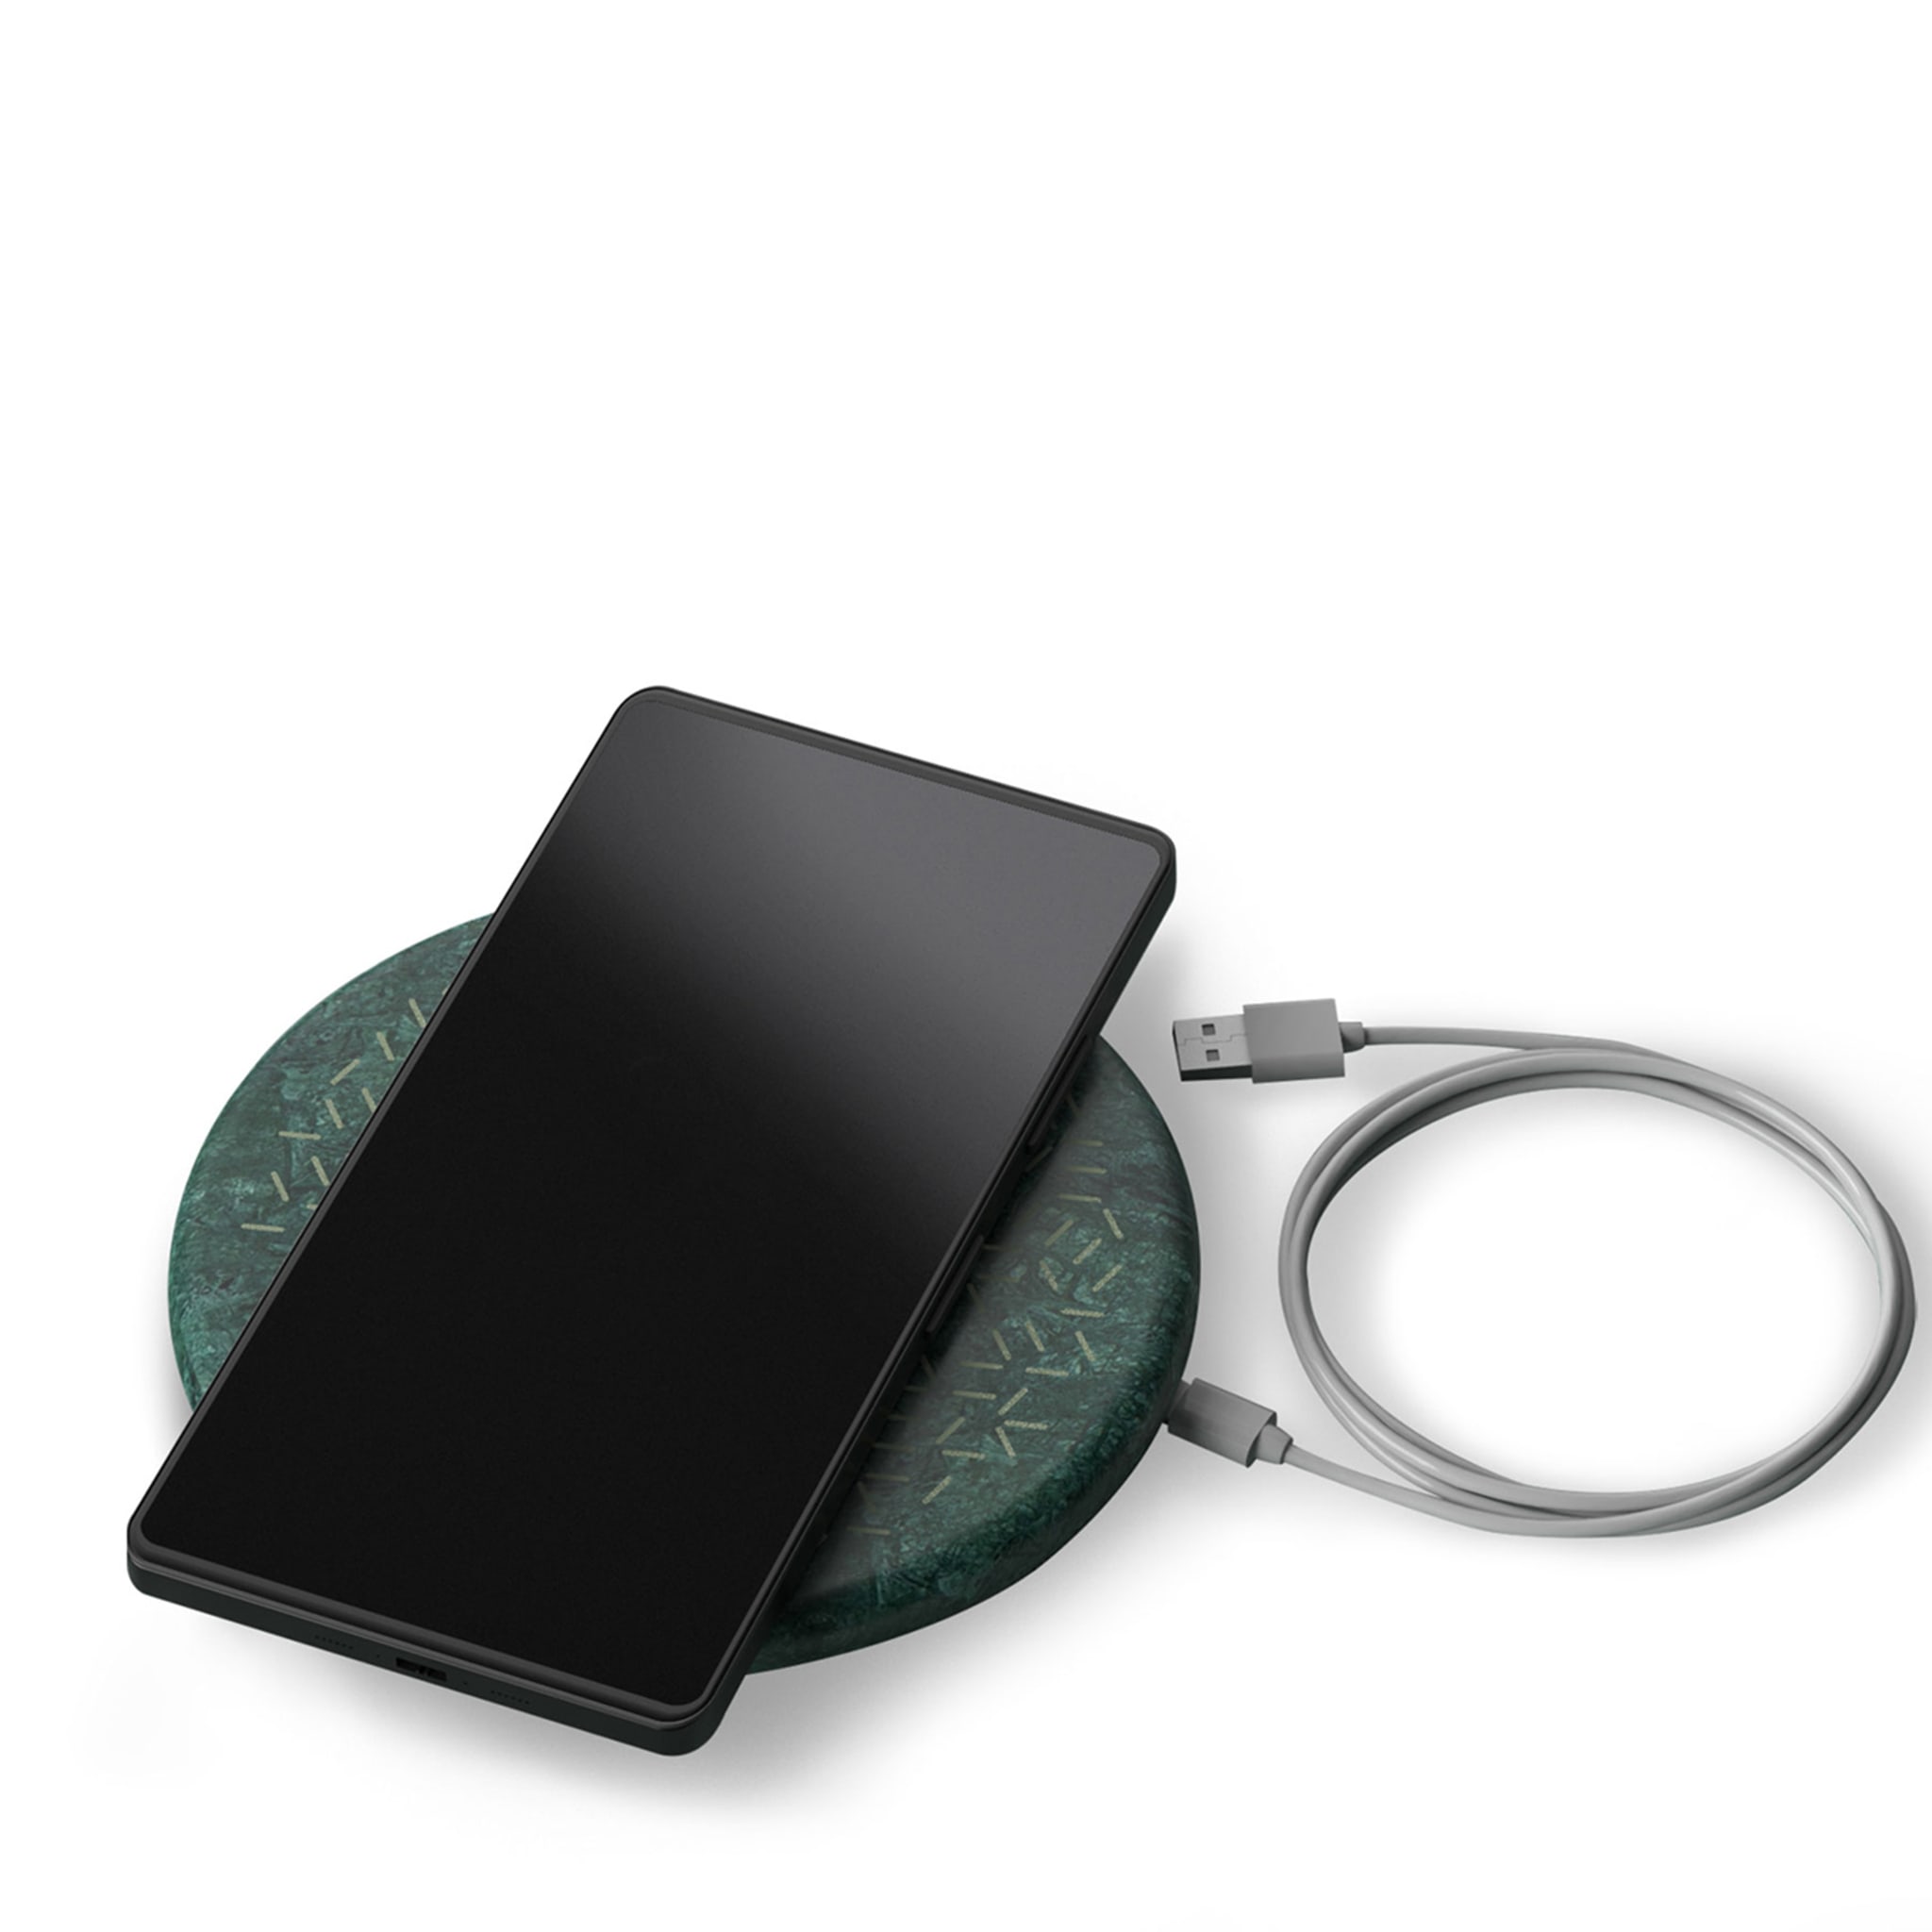 Selce Wireless Phone Charger by Efrem Bonacina and Andrea Teoldi - Alternative view 1